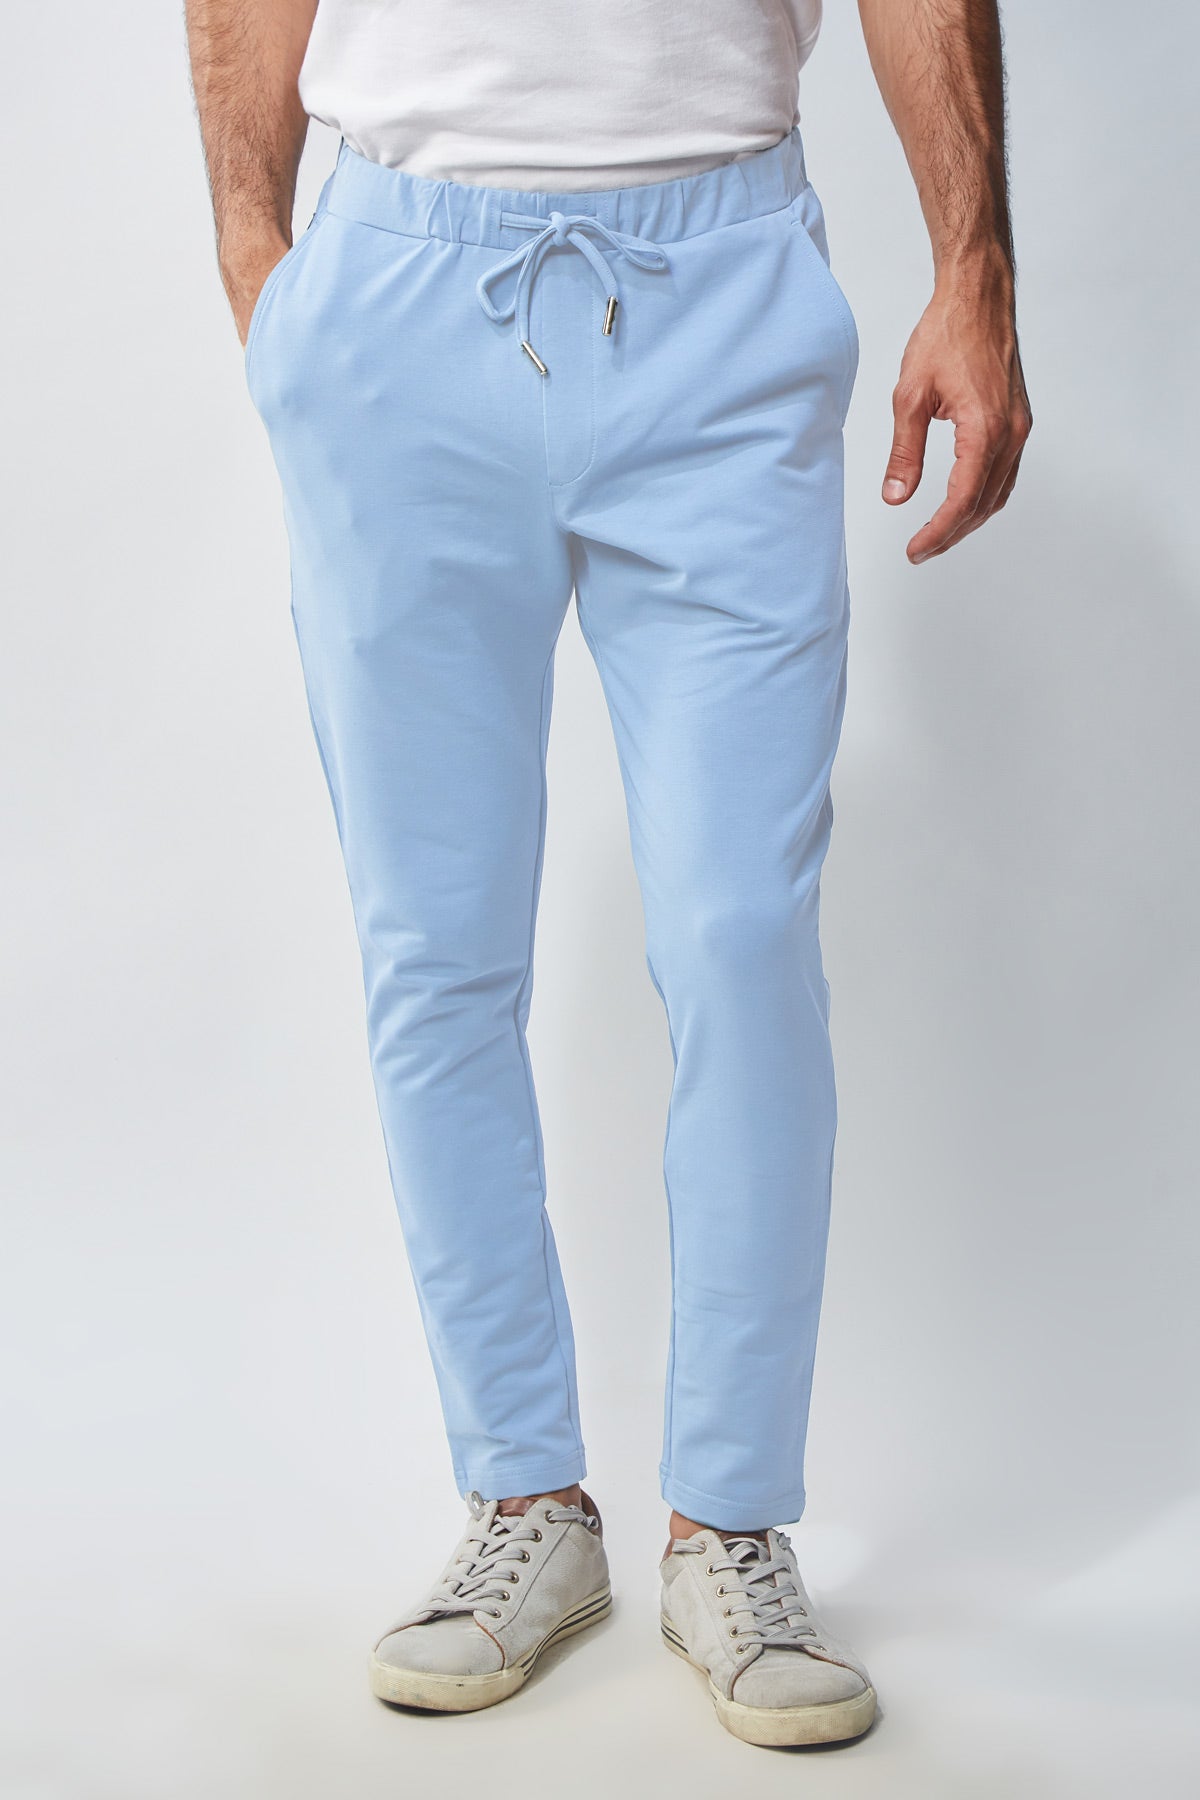 Easy Powder Blue Sweatpant Beyours Essentials Private Limited